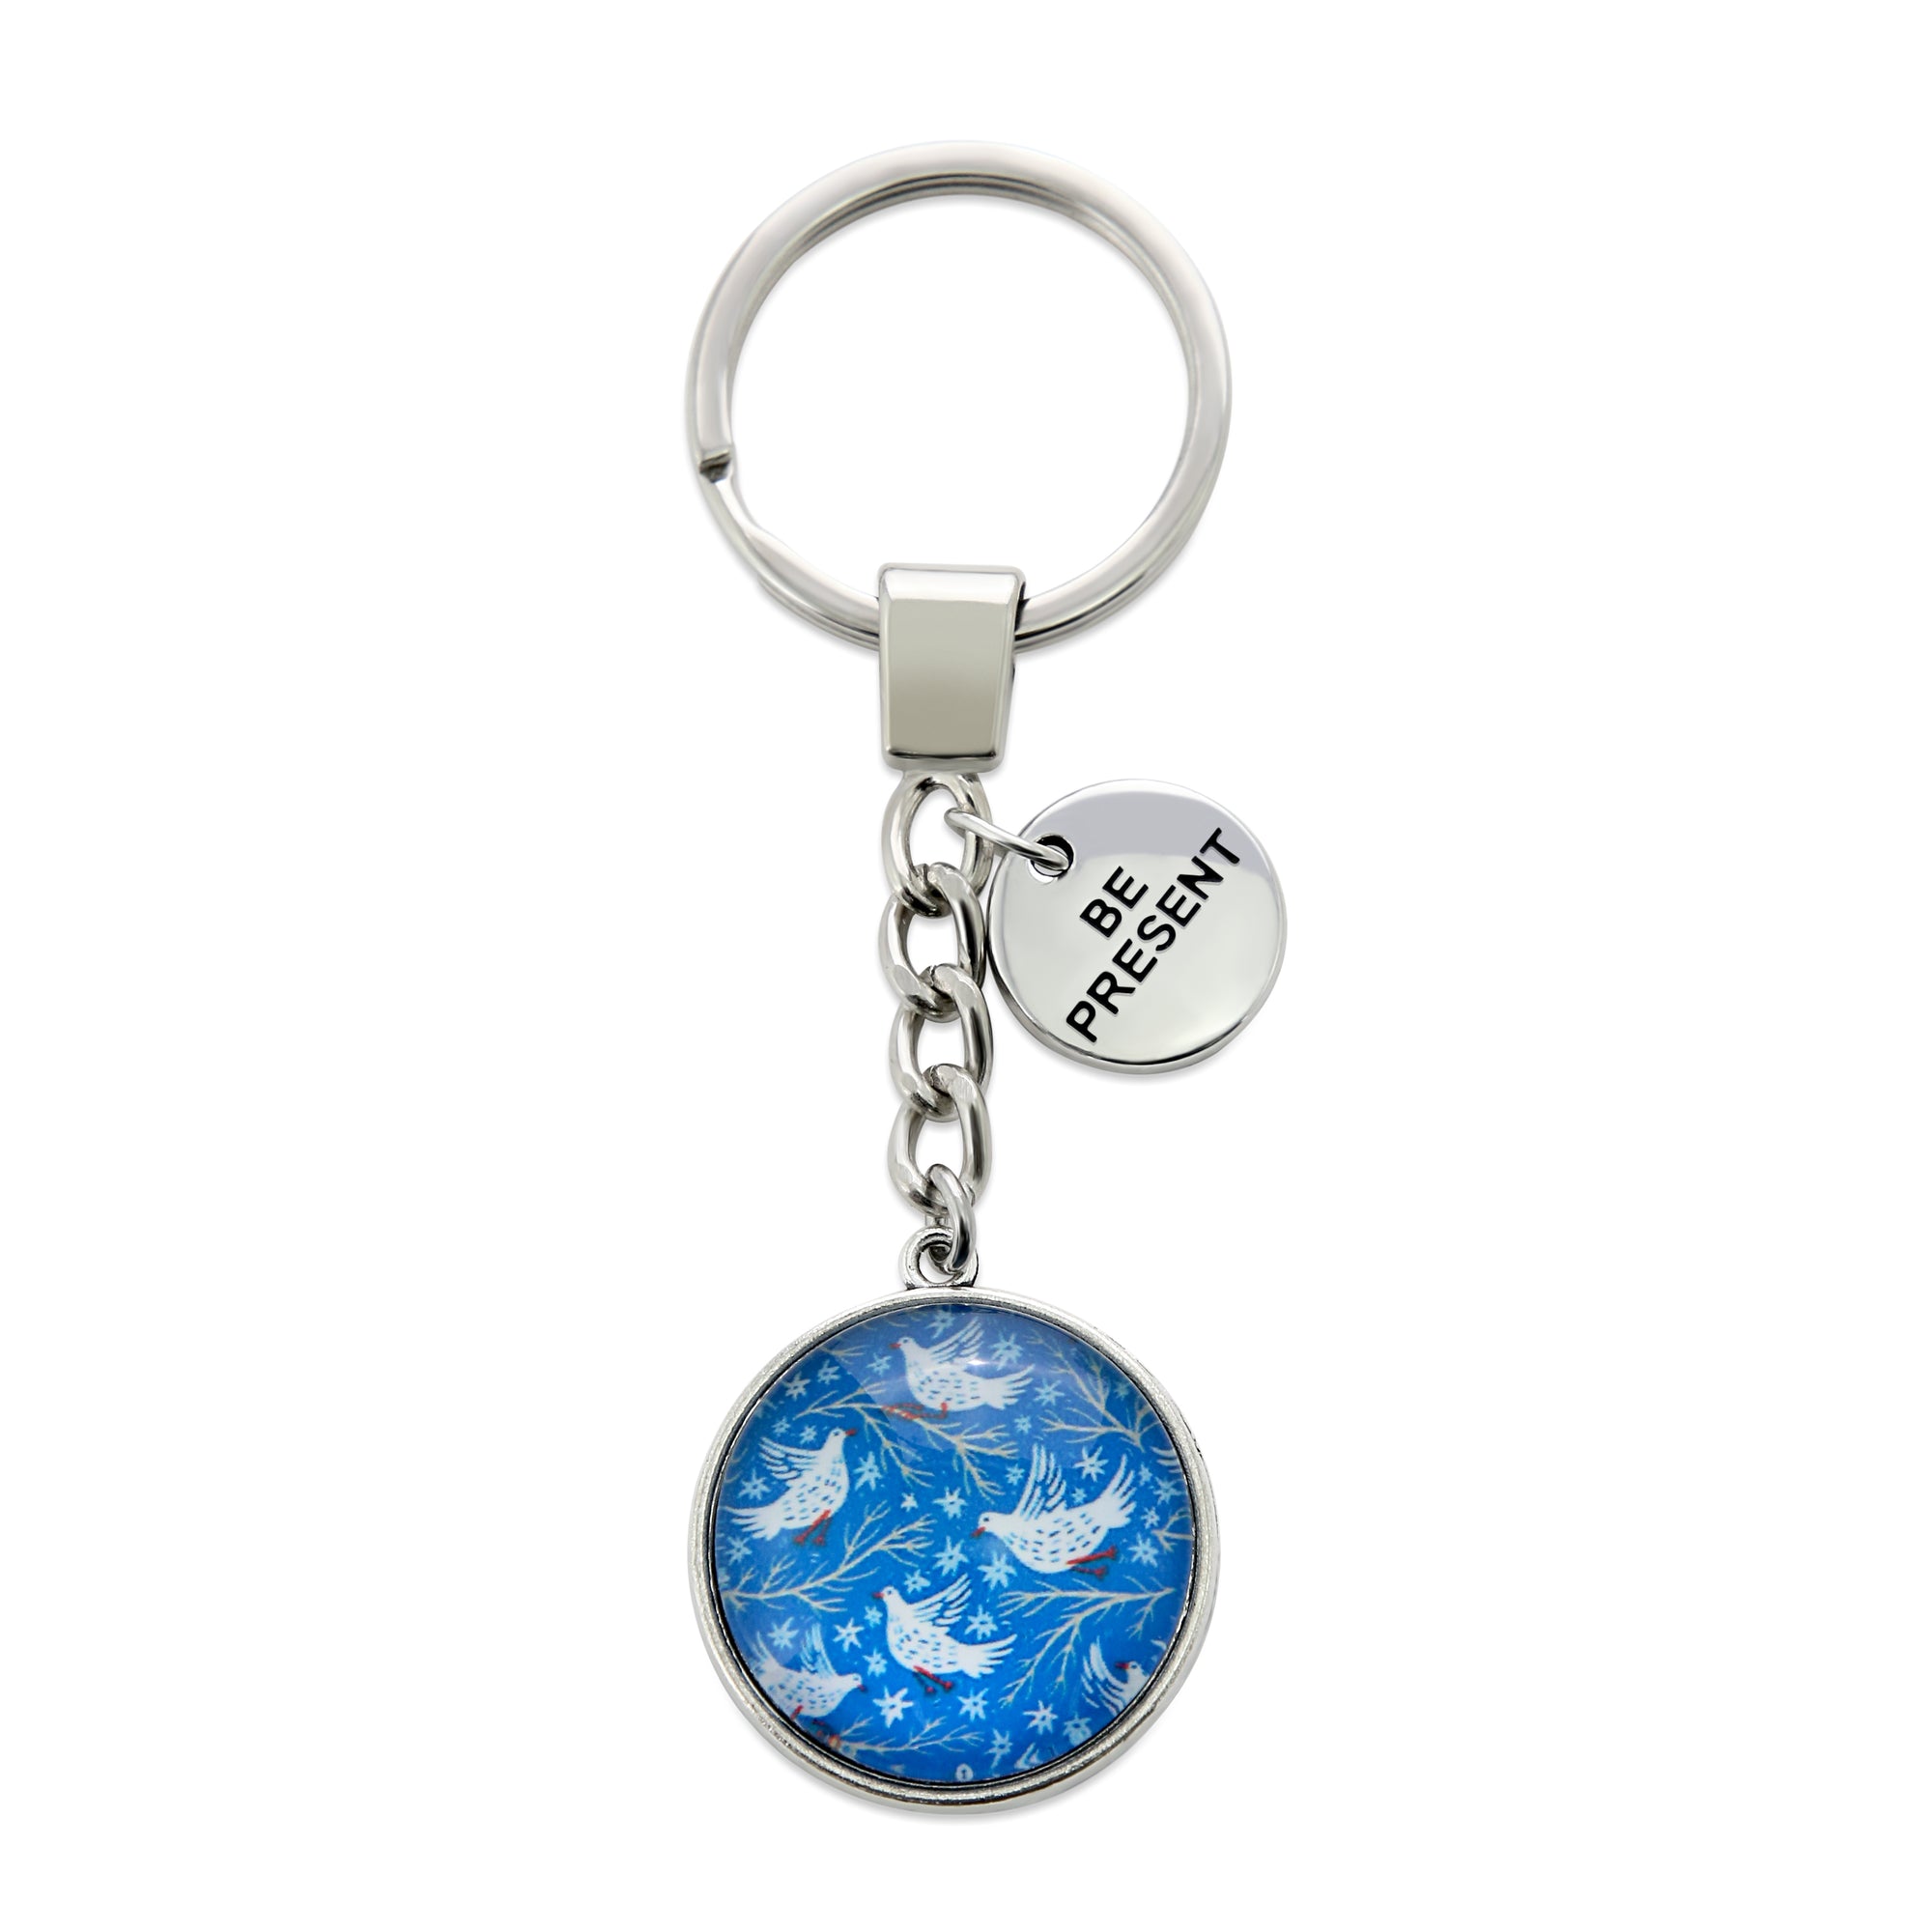 Blue Collection - Vintage Silver 'BE PRESENT' Keyring - Snow Bird (10651)